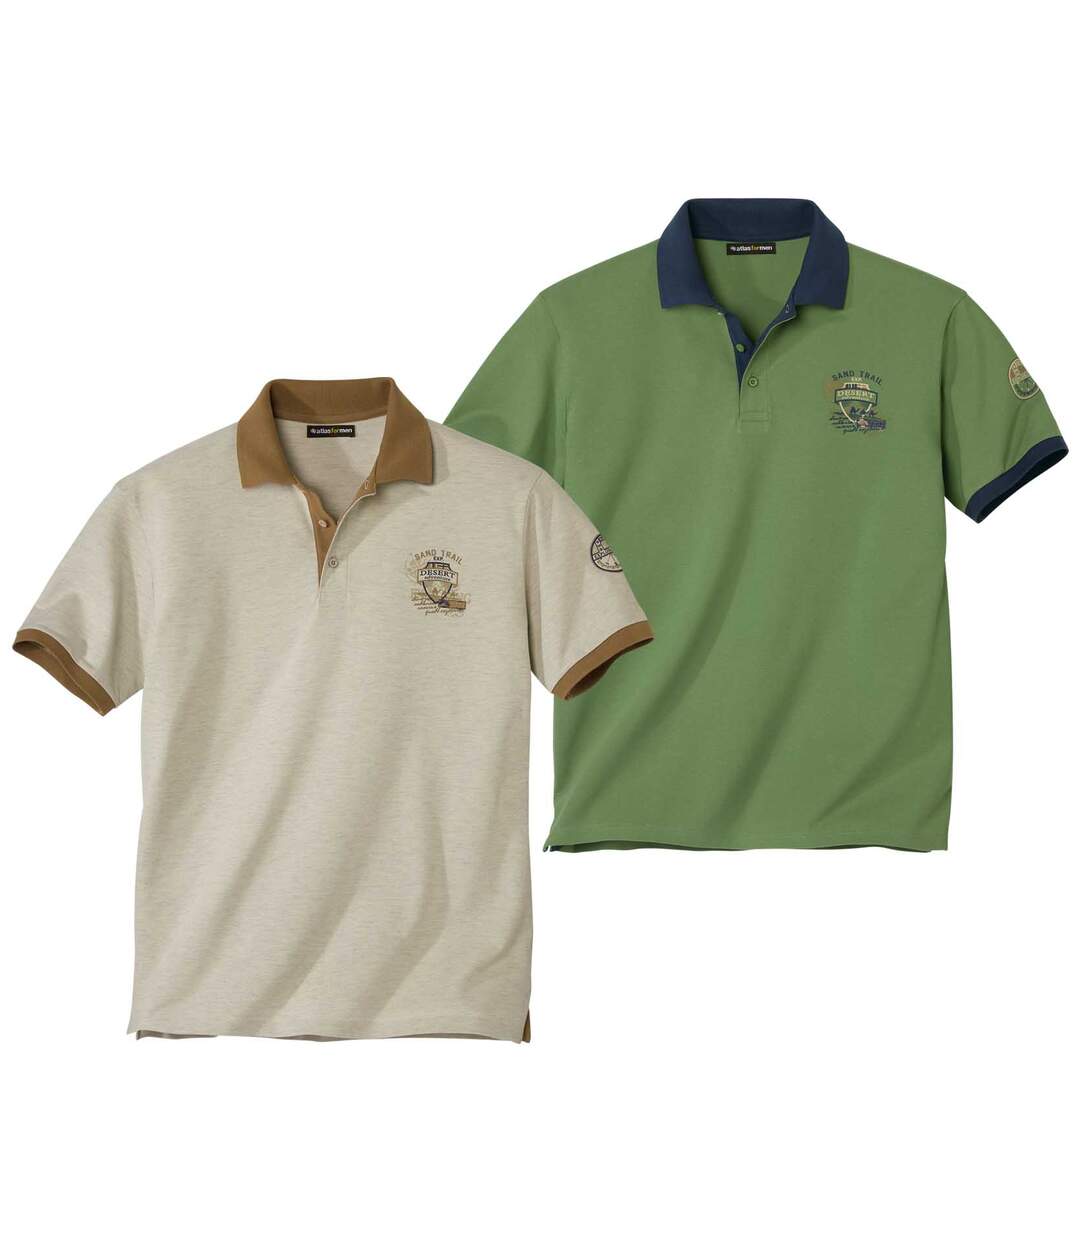 Pack of 2 Men's Casual Polo Shirts - Green Beige Atlas For Men